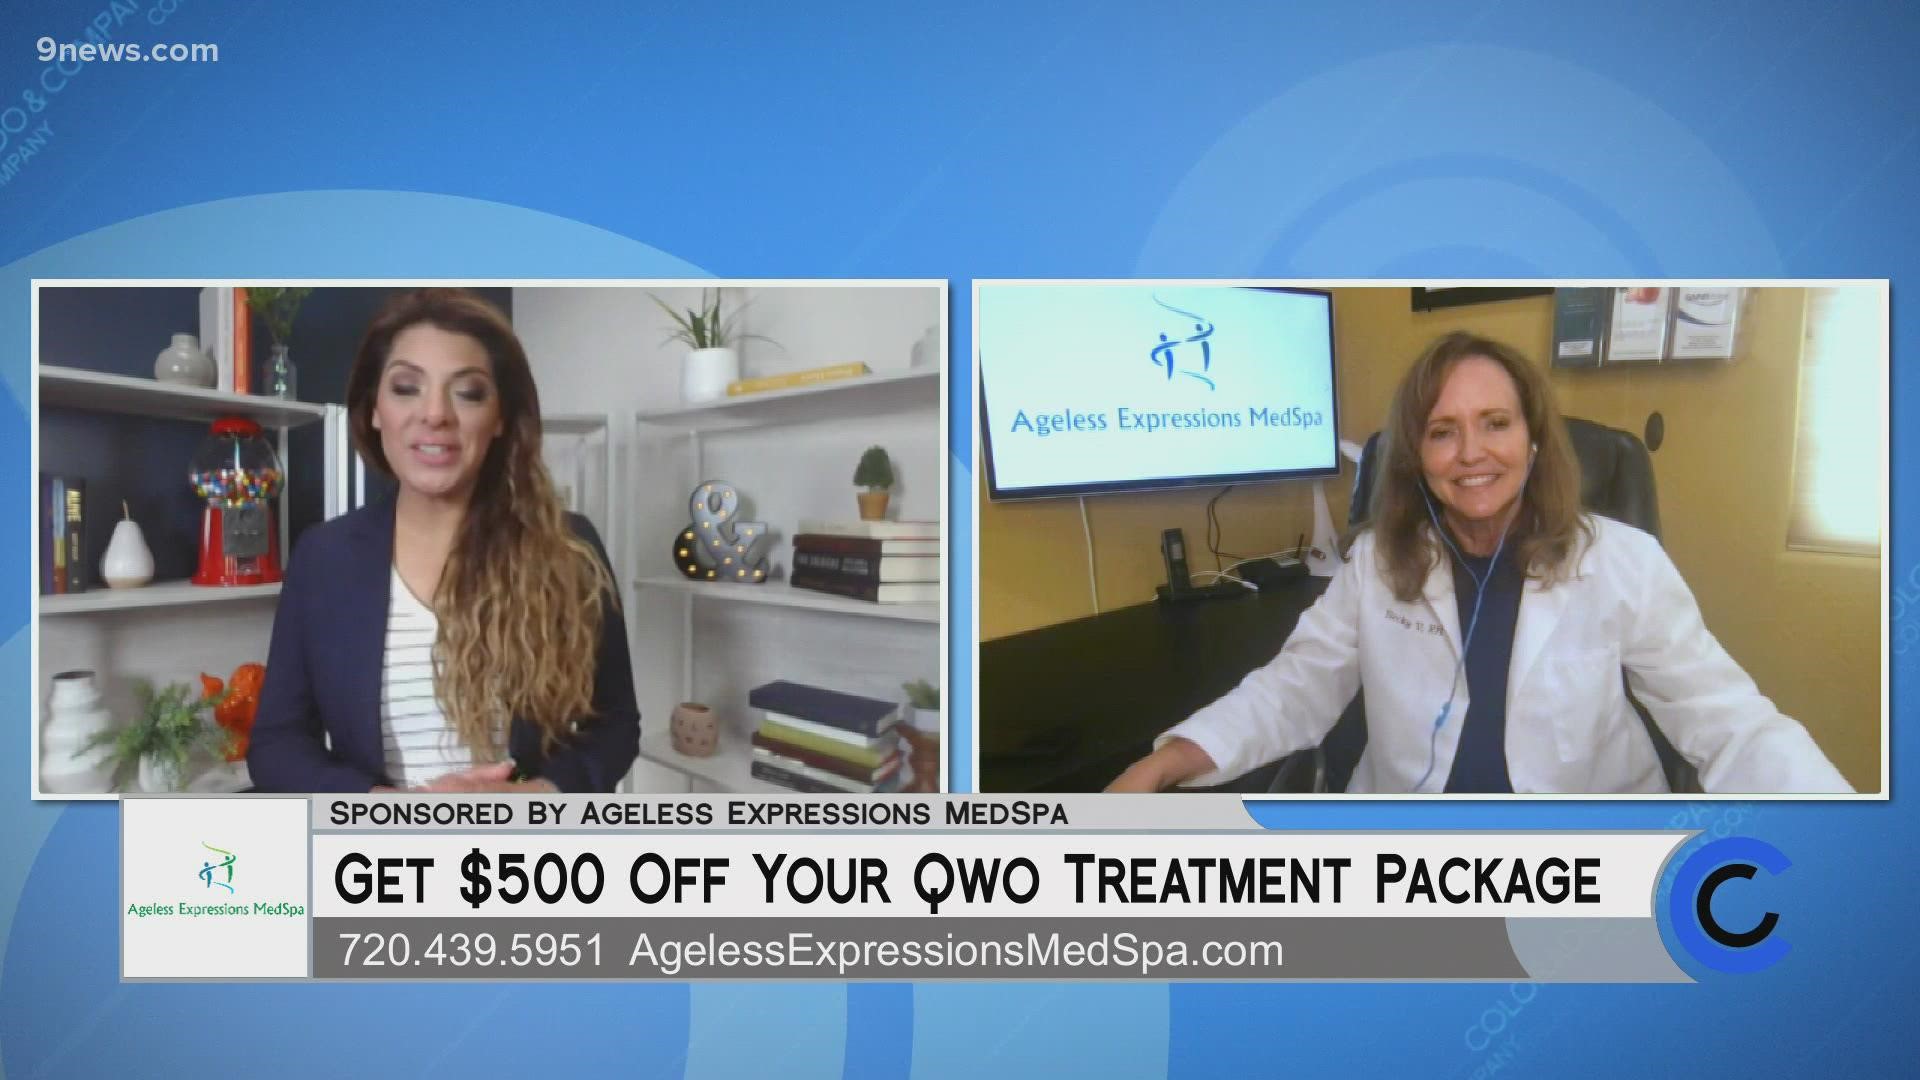 The first 10 callers to 720.439.5951 can get $500 off a Qwo treatment package. Learn more and get started at AgelessExpressionsMedSpa.com. **PAID CONTENT**